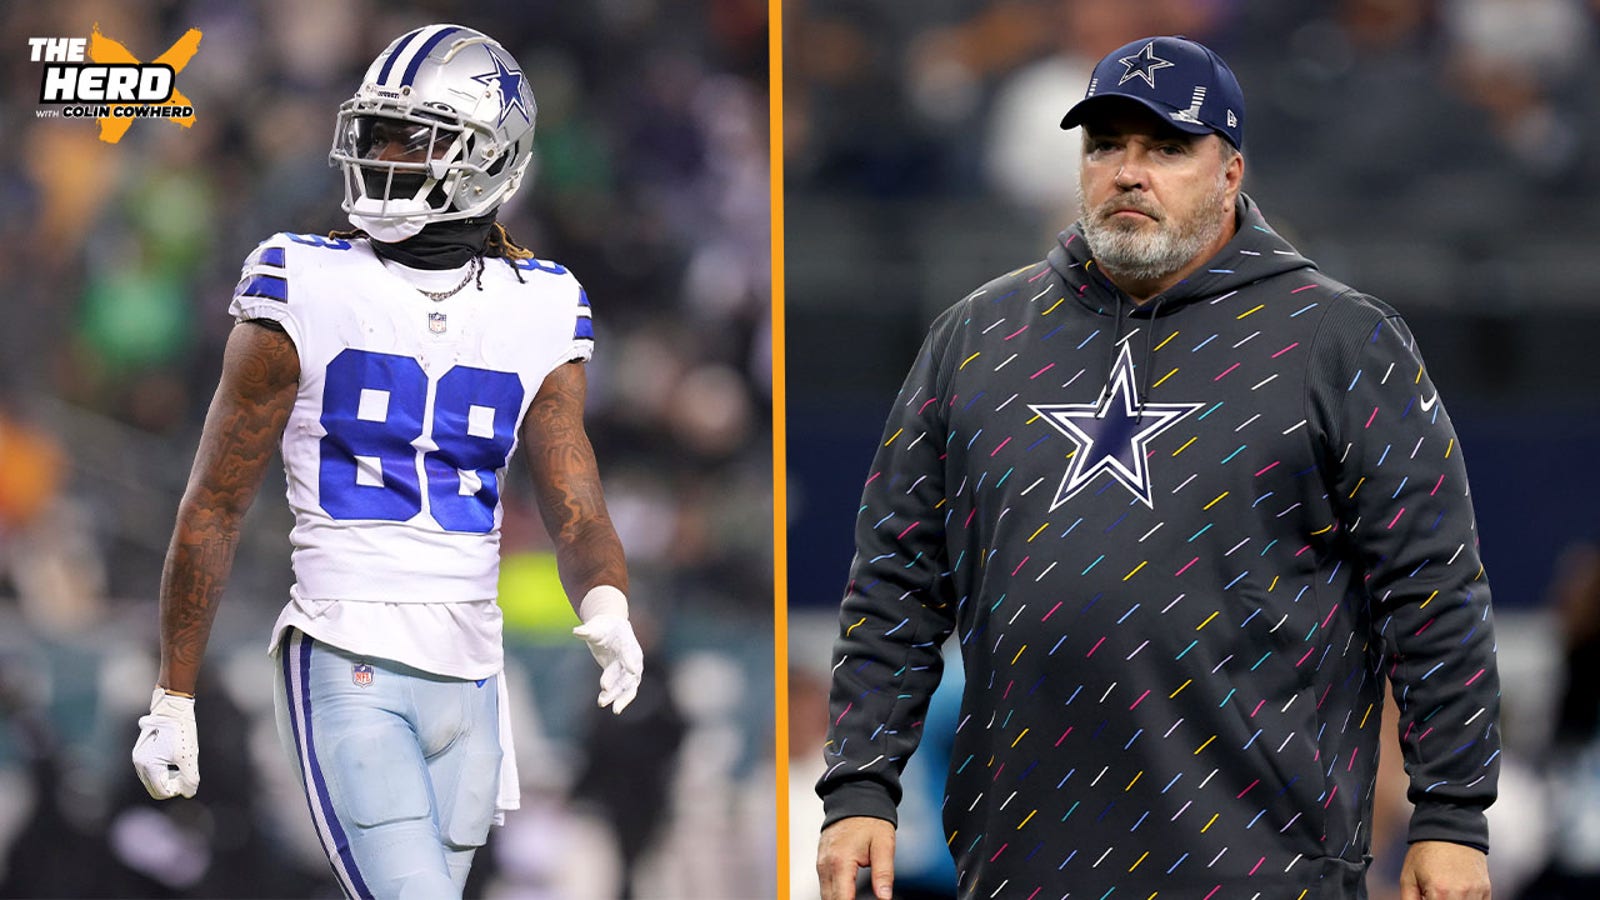 Why Cowboys' discipline and WR core are concerning